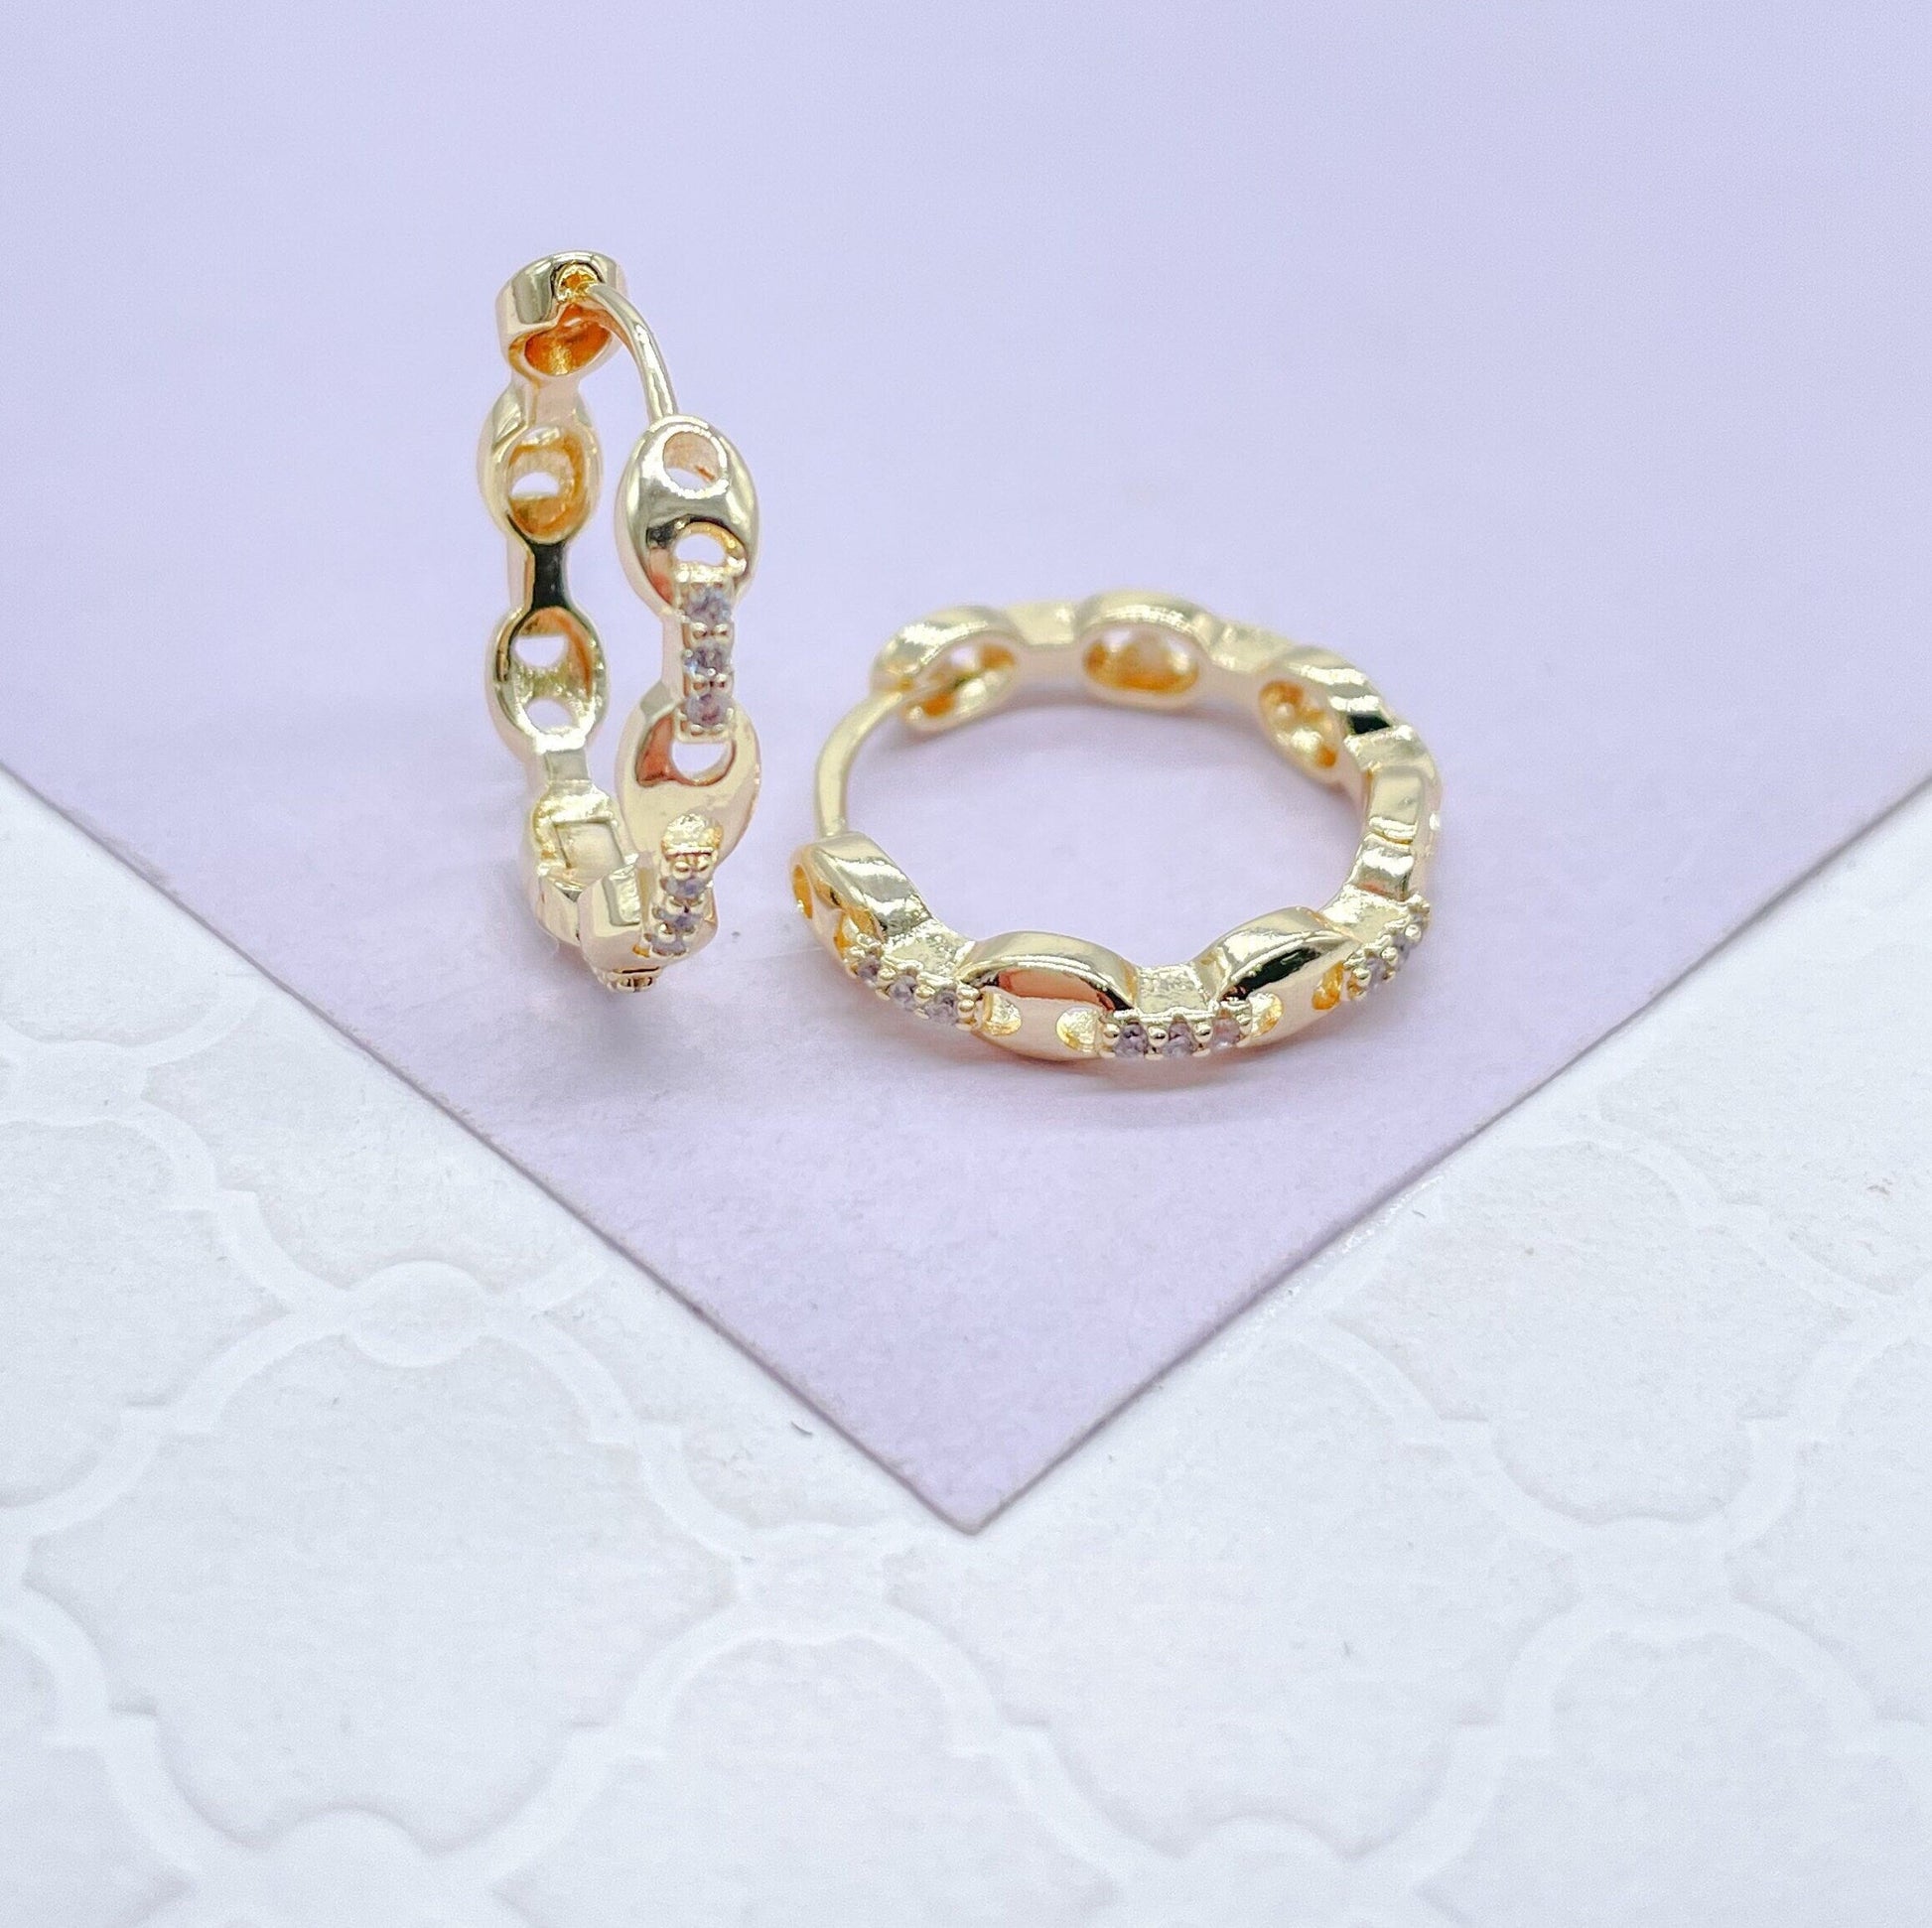 18k Gold Filled Puffy Mariner Curb Link Huggie Hoops With CZ Stones